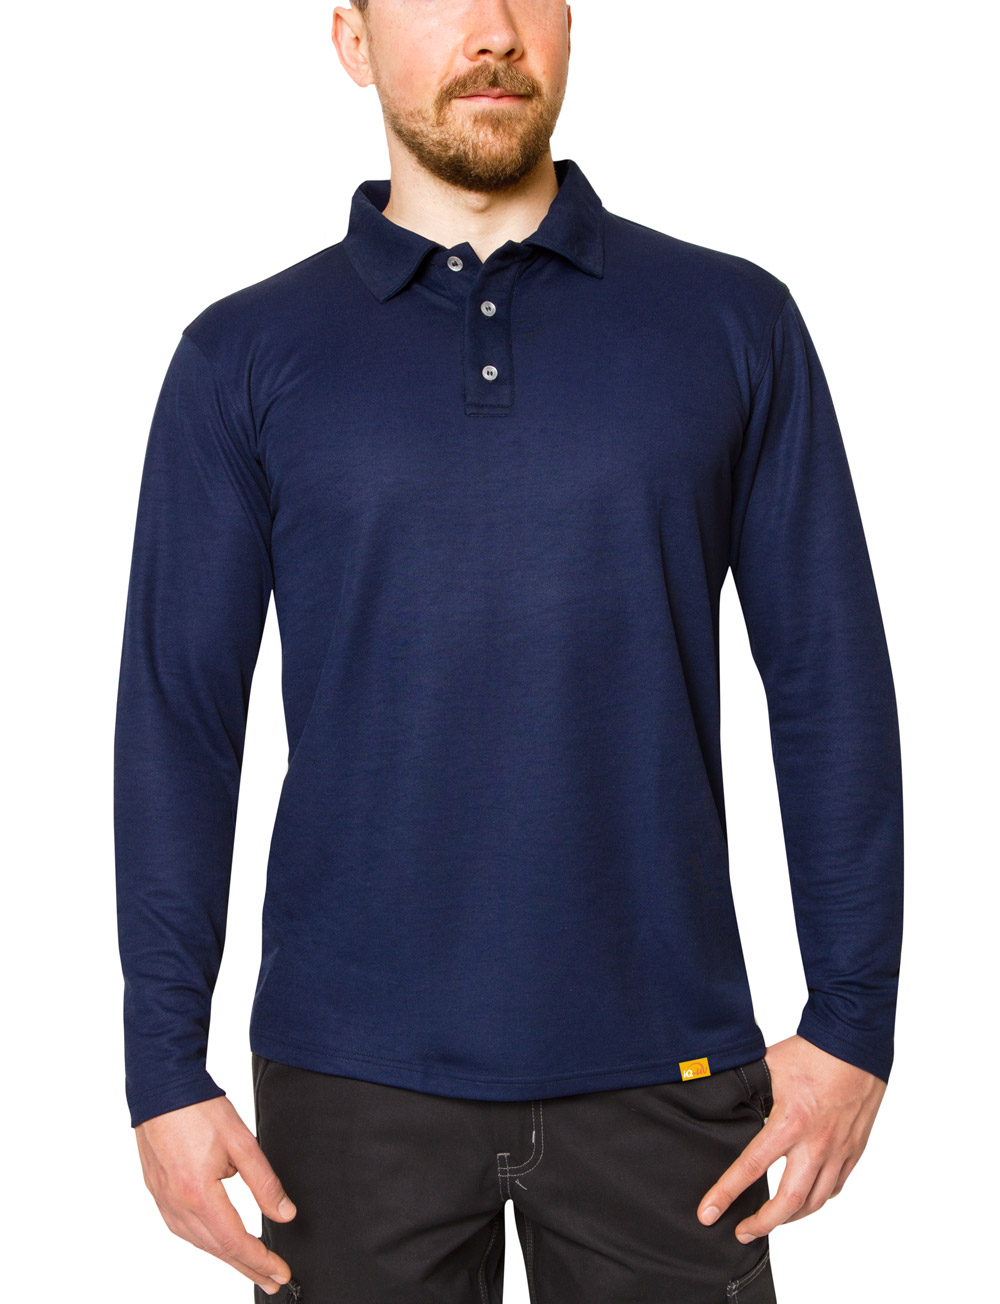 UV Polo Shirt Men's Long Sleeve Leisure and everyday wear